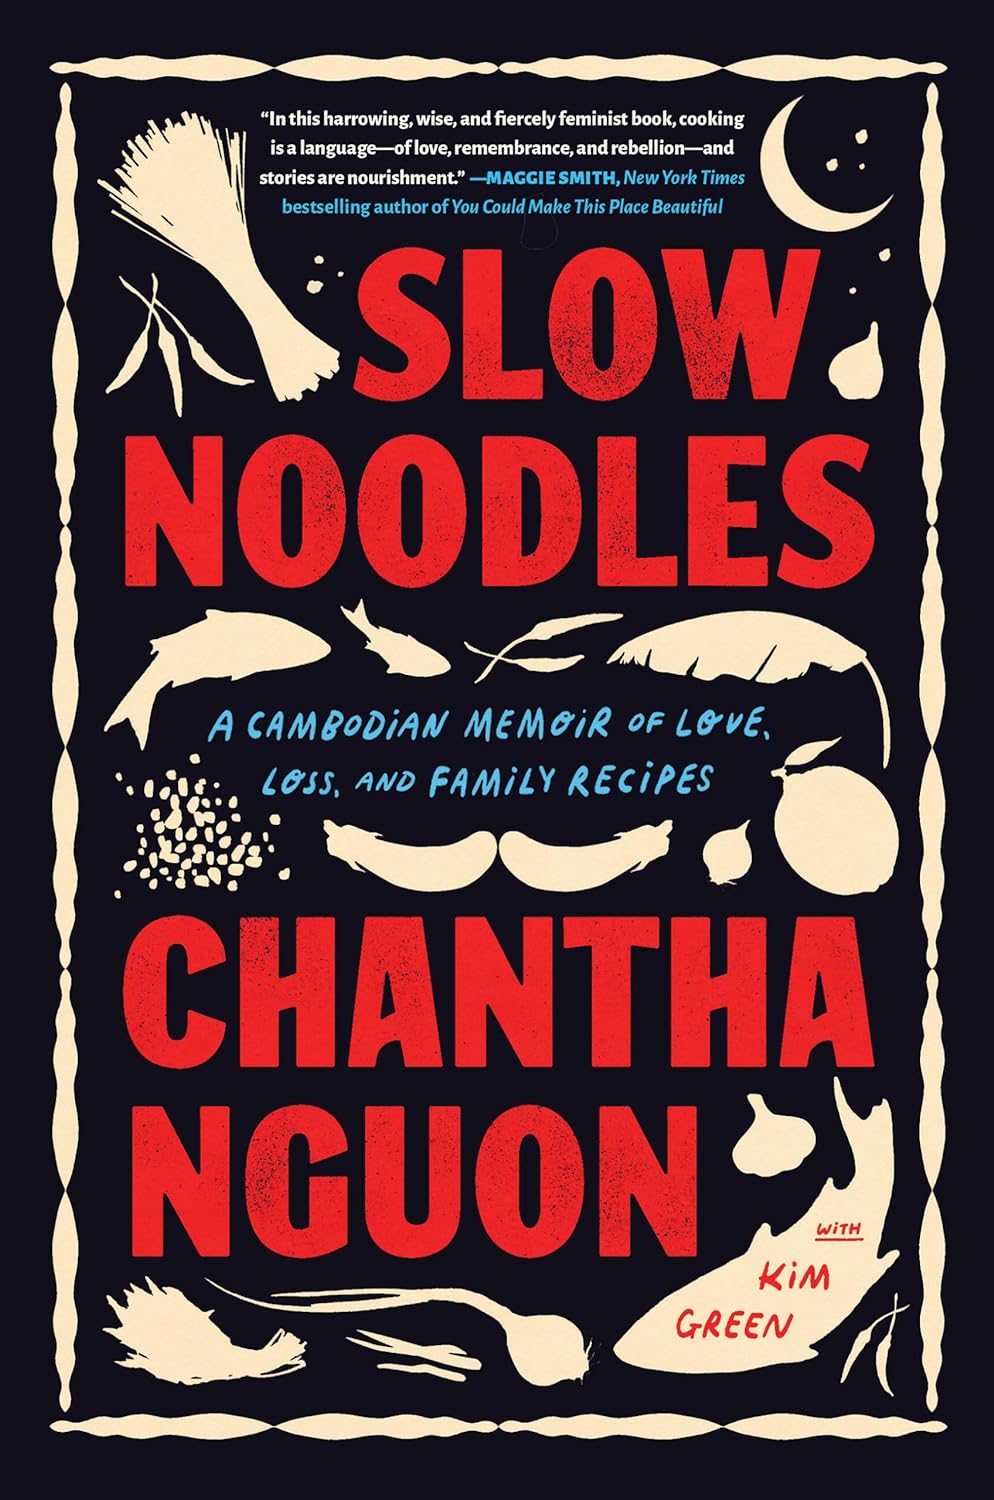 Slow Noodles: A Cambodian Memoir of Love, Loss, and Family Recipes (Chantha Nguon, Kim Green)